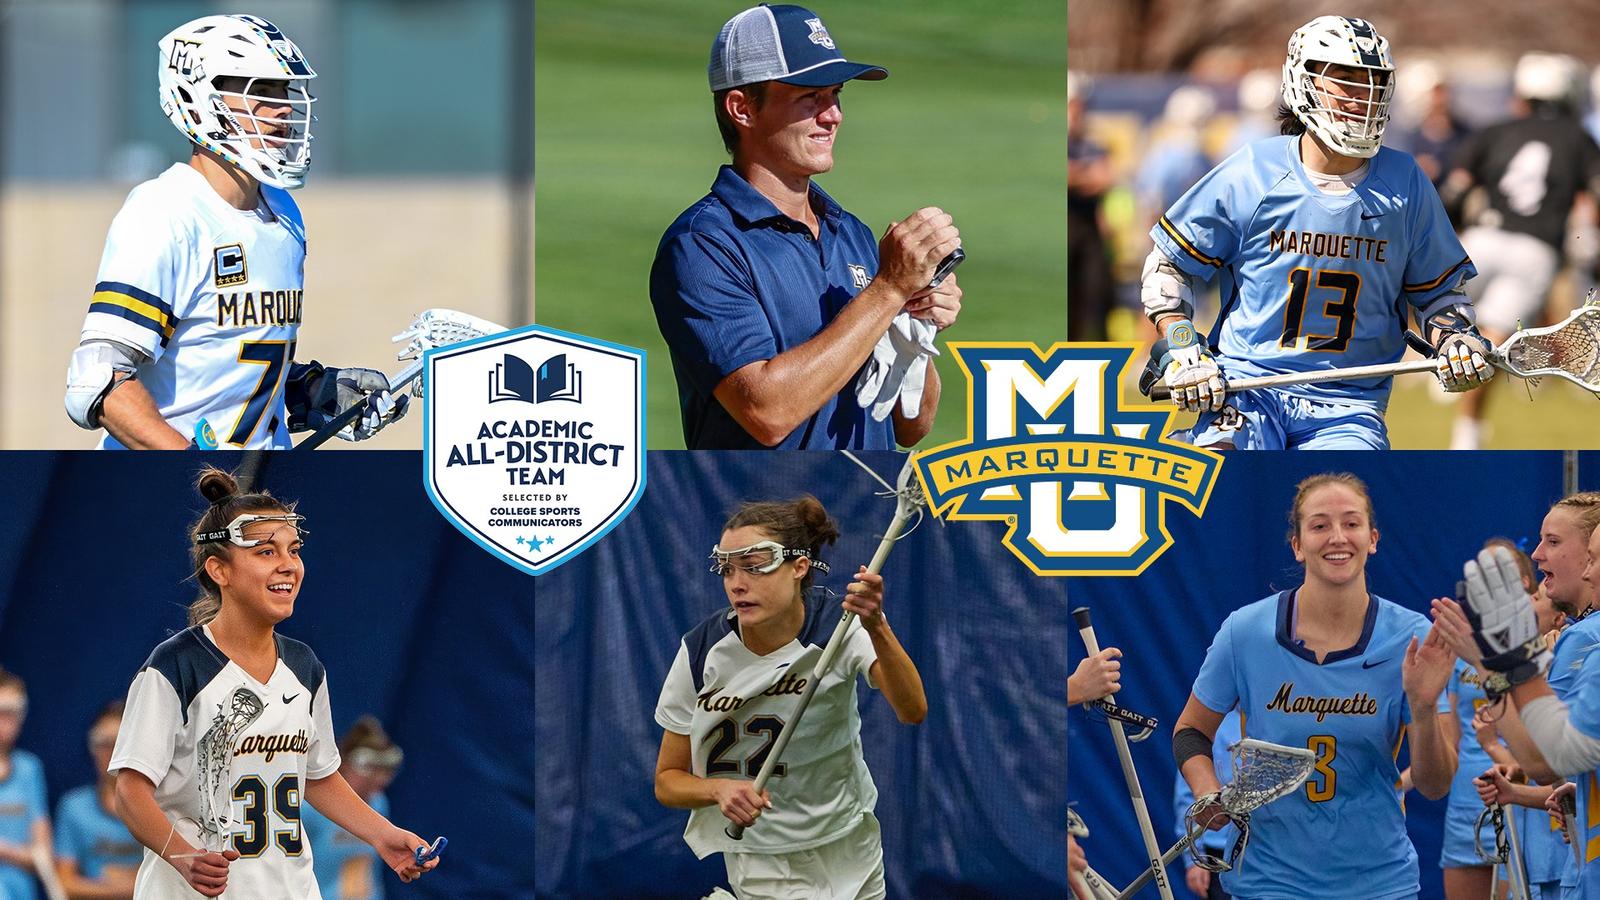 Six Marquette Student-athletes are CSC Academic All-District